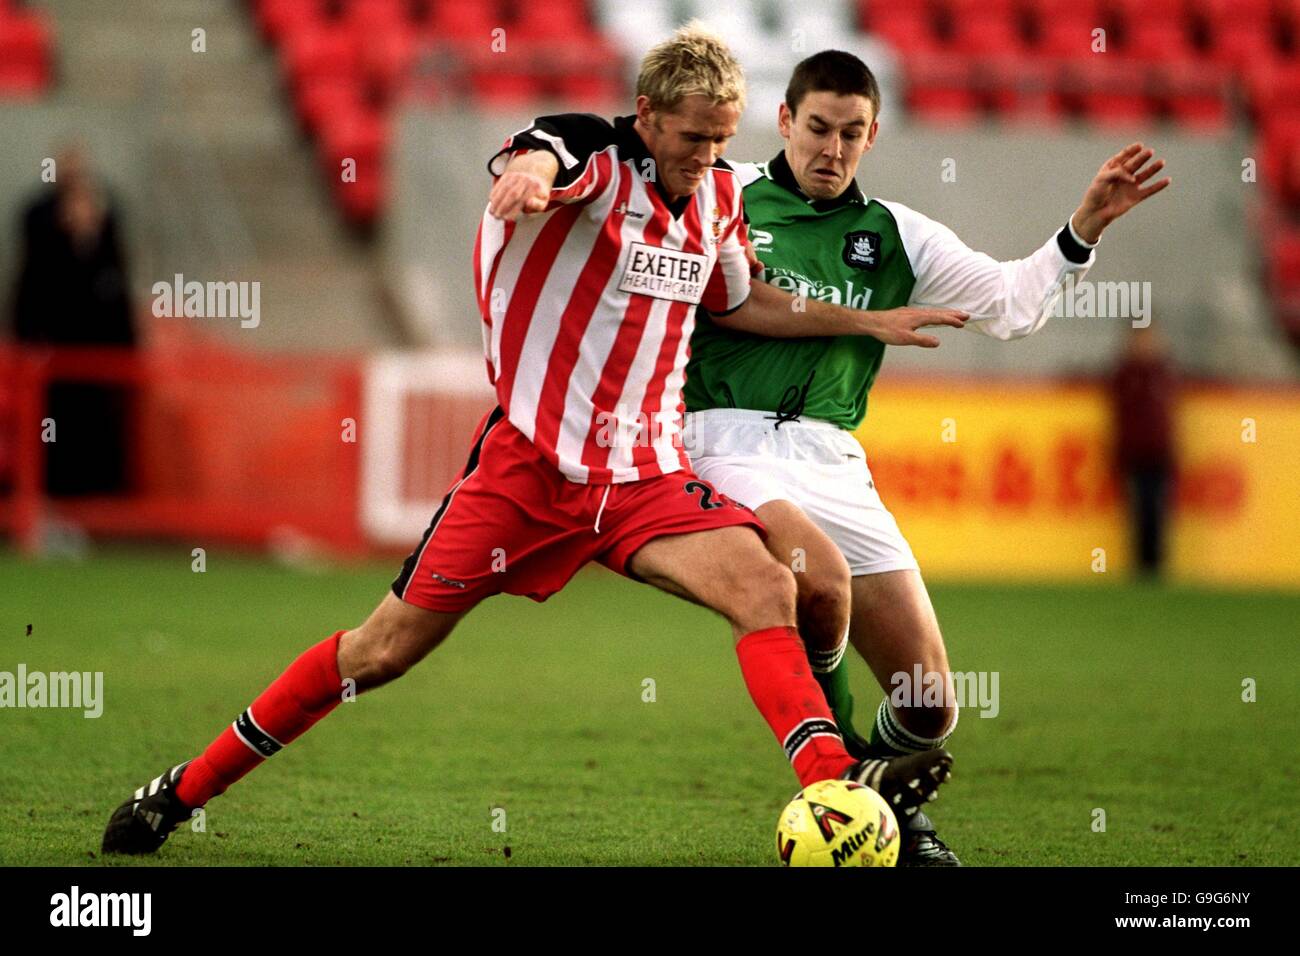 Soccer - Nationwide League Division Three - Exeter City v Plymouth. Plymouth's Ian Stonebridge (r) challenges Exeter City's Jamie Campbell (l) for the ball Stock Photo